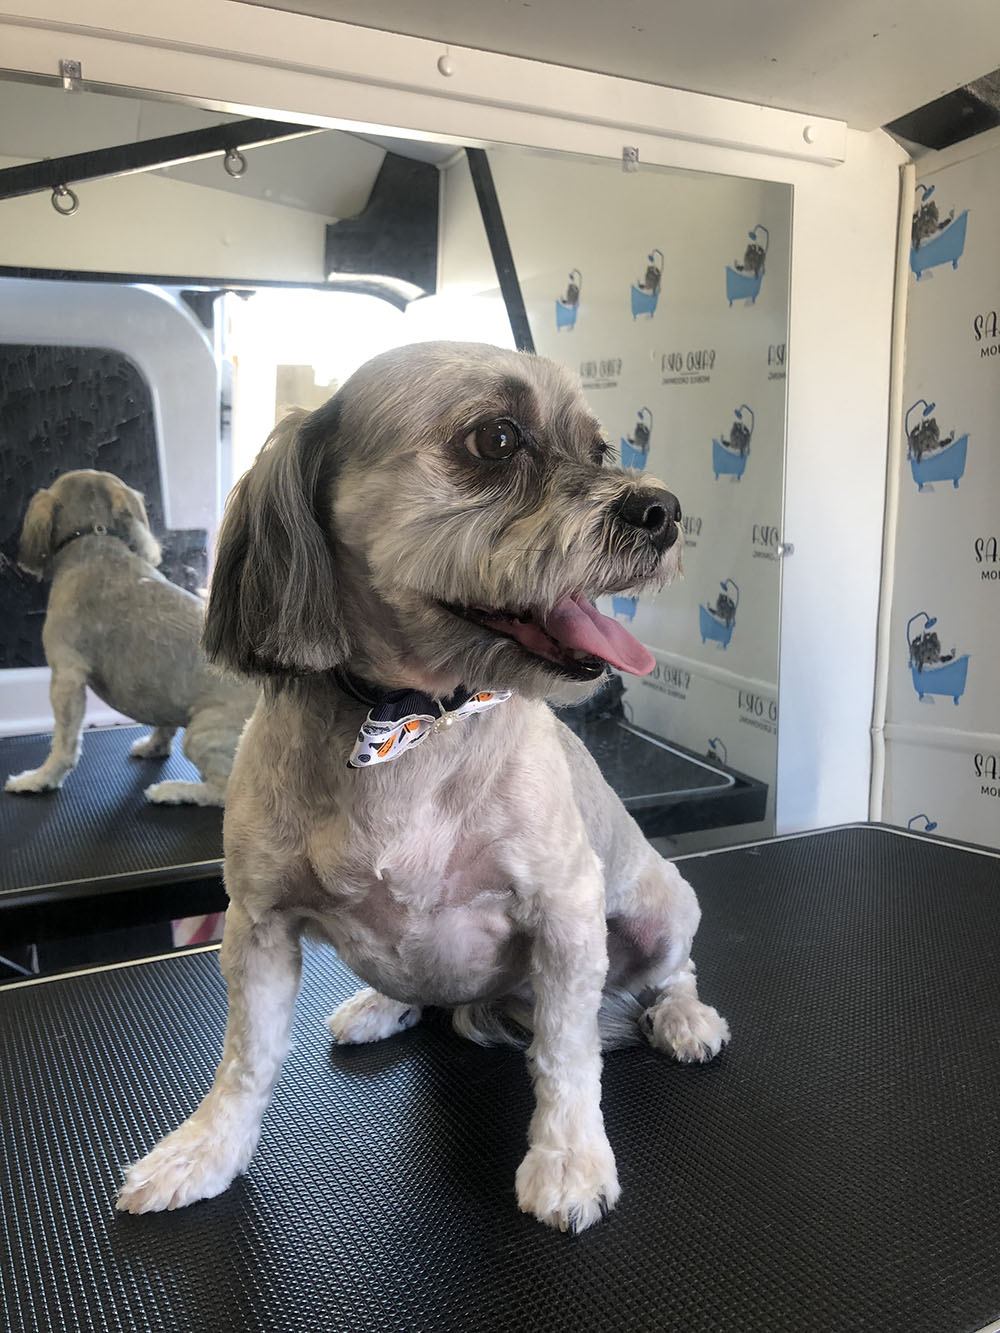 A Small Dog With Turned Head After Grooming